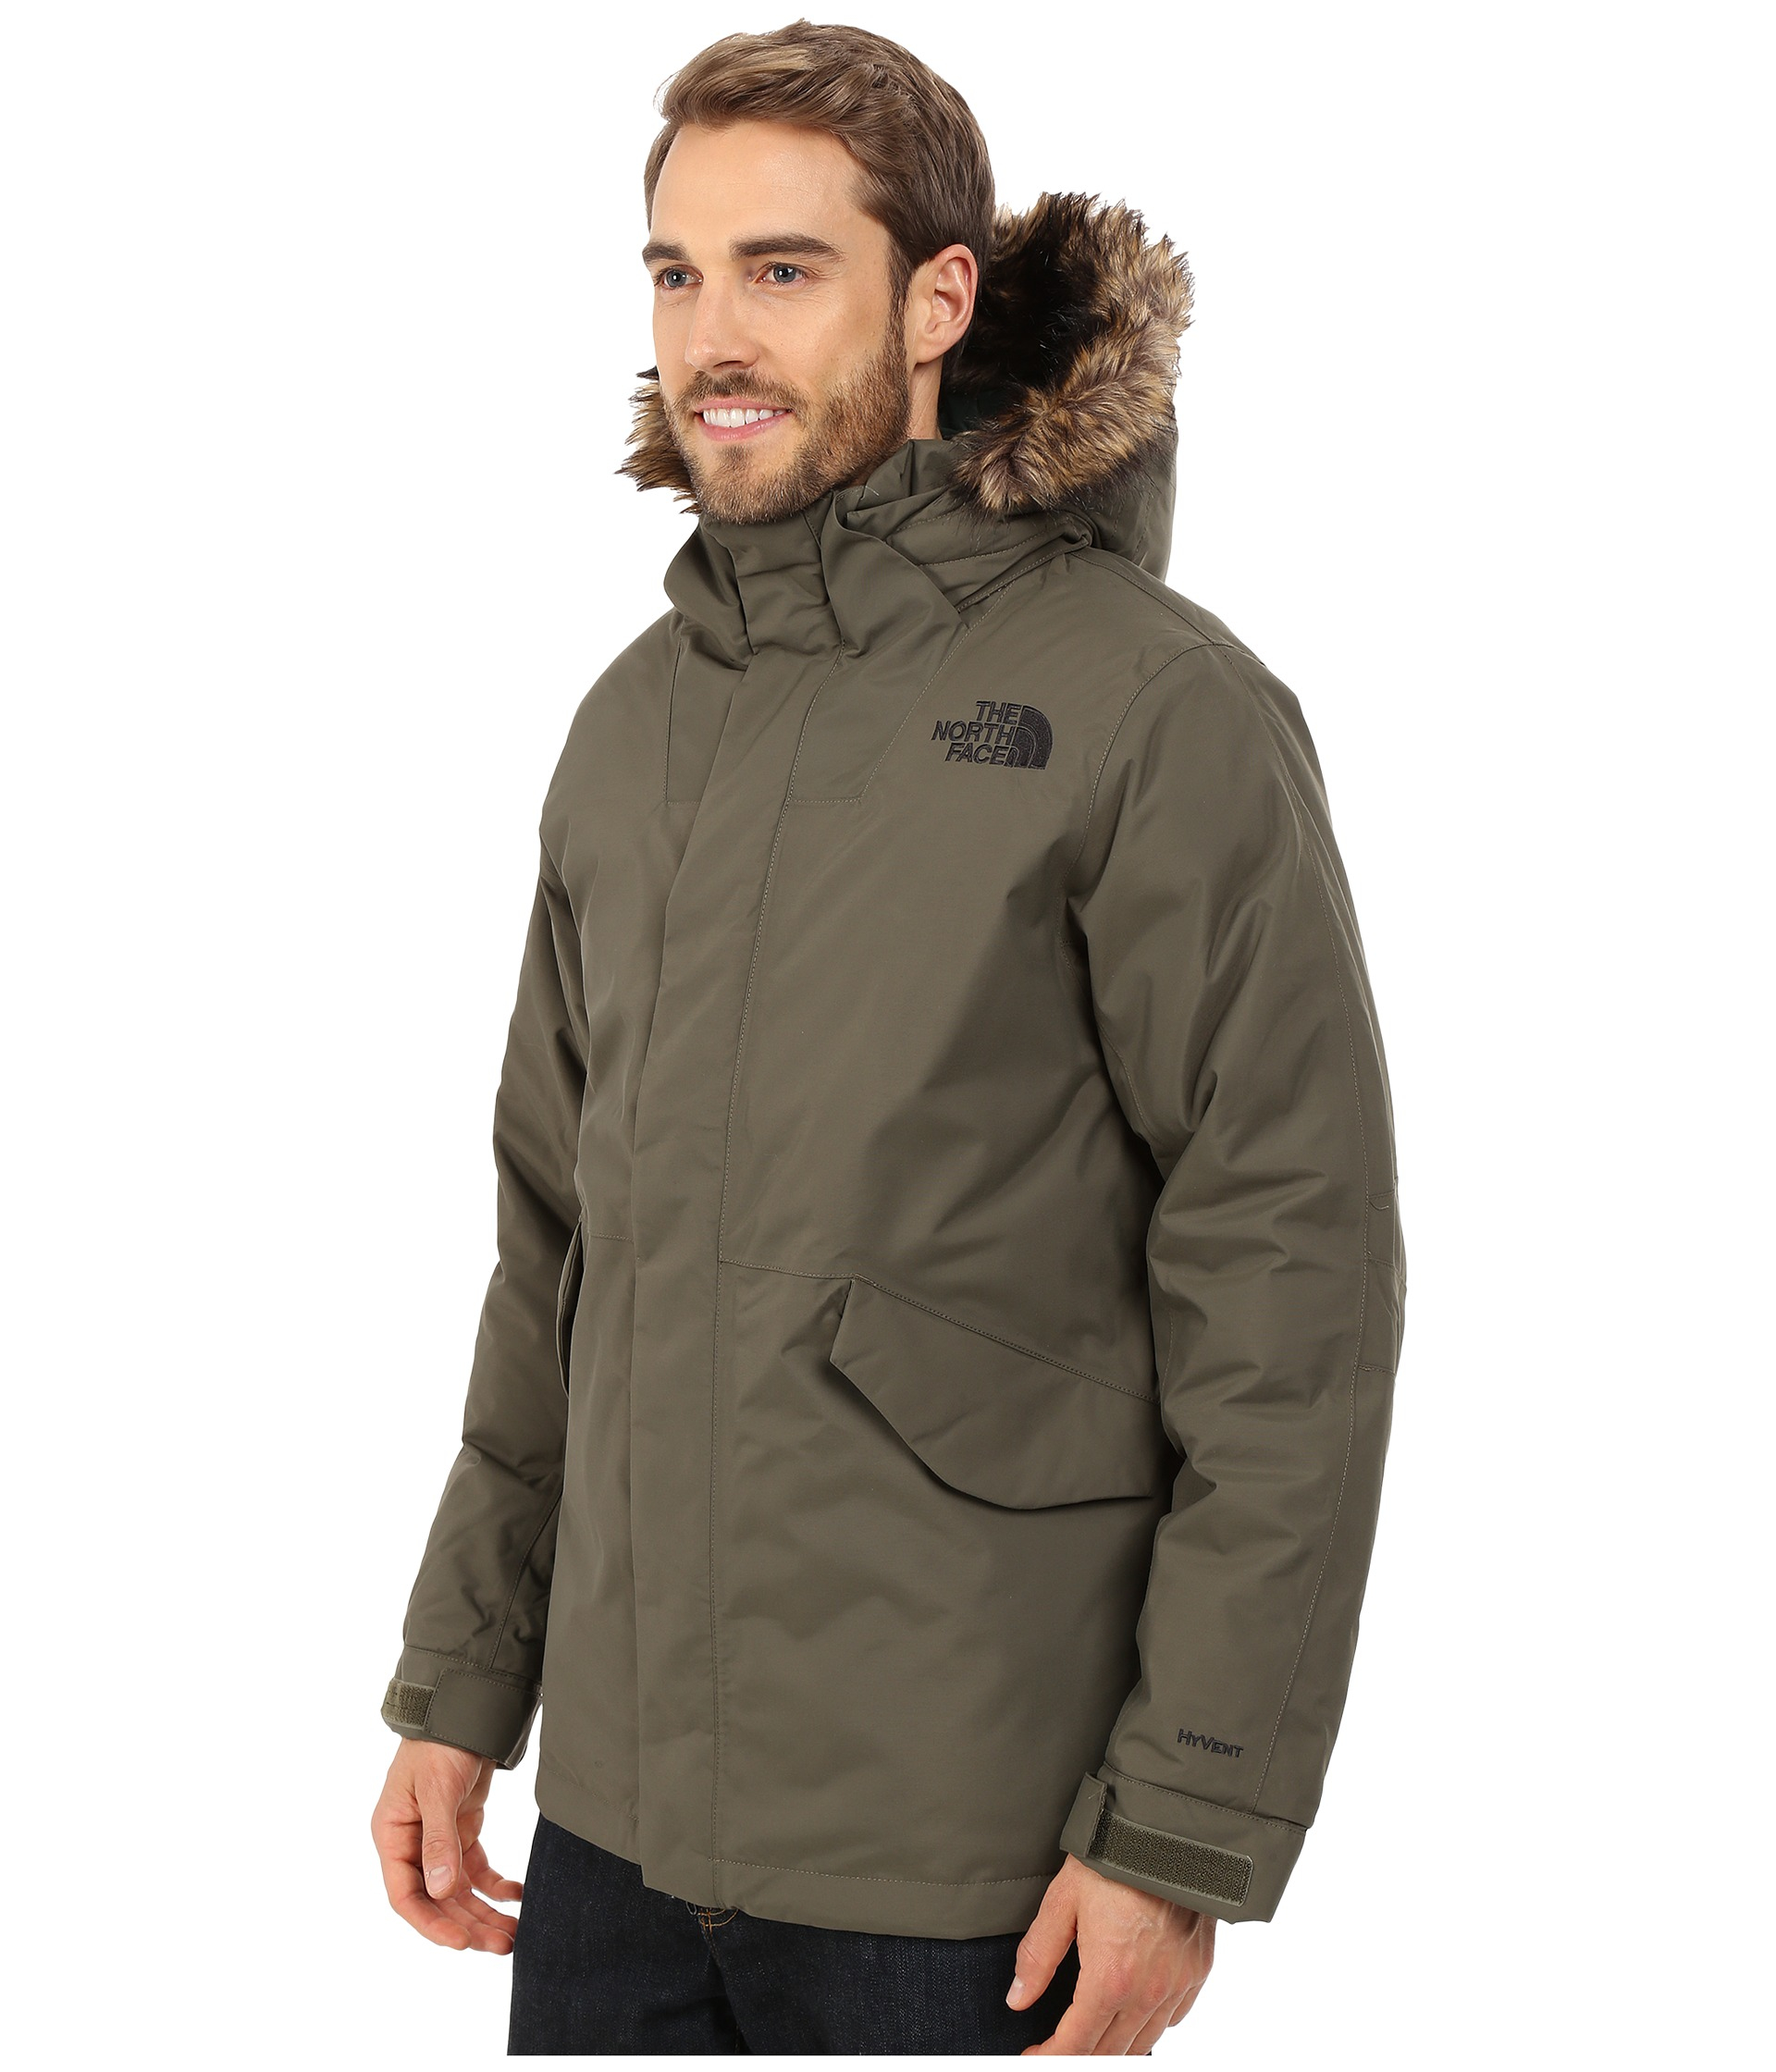 The North Face Mount Logan Jacket in 